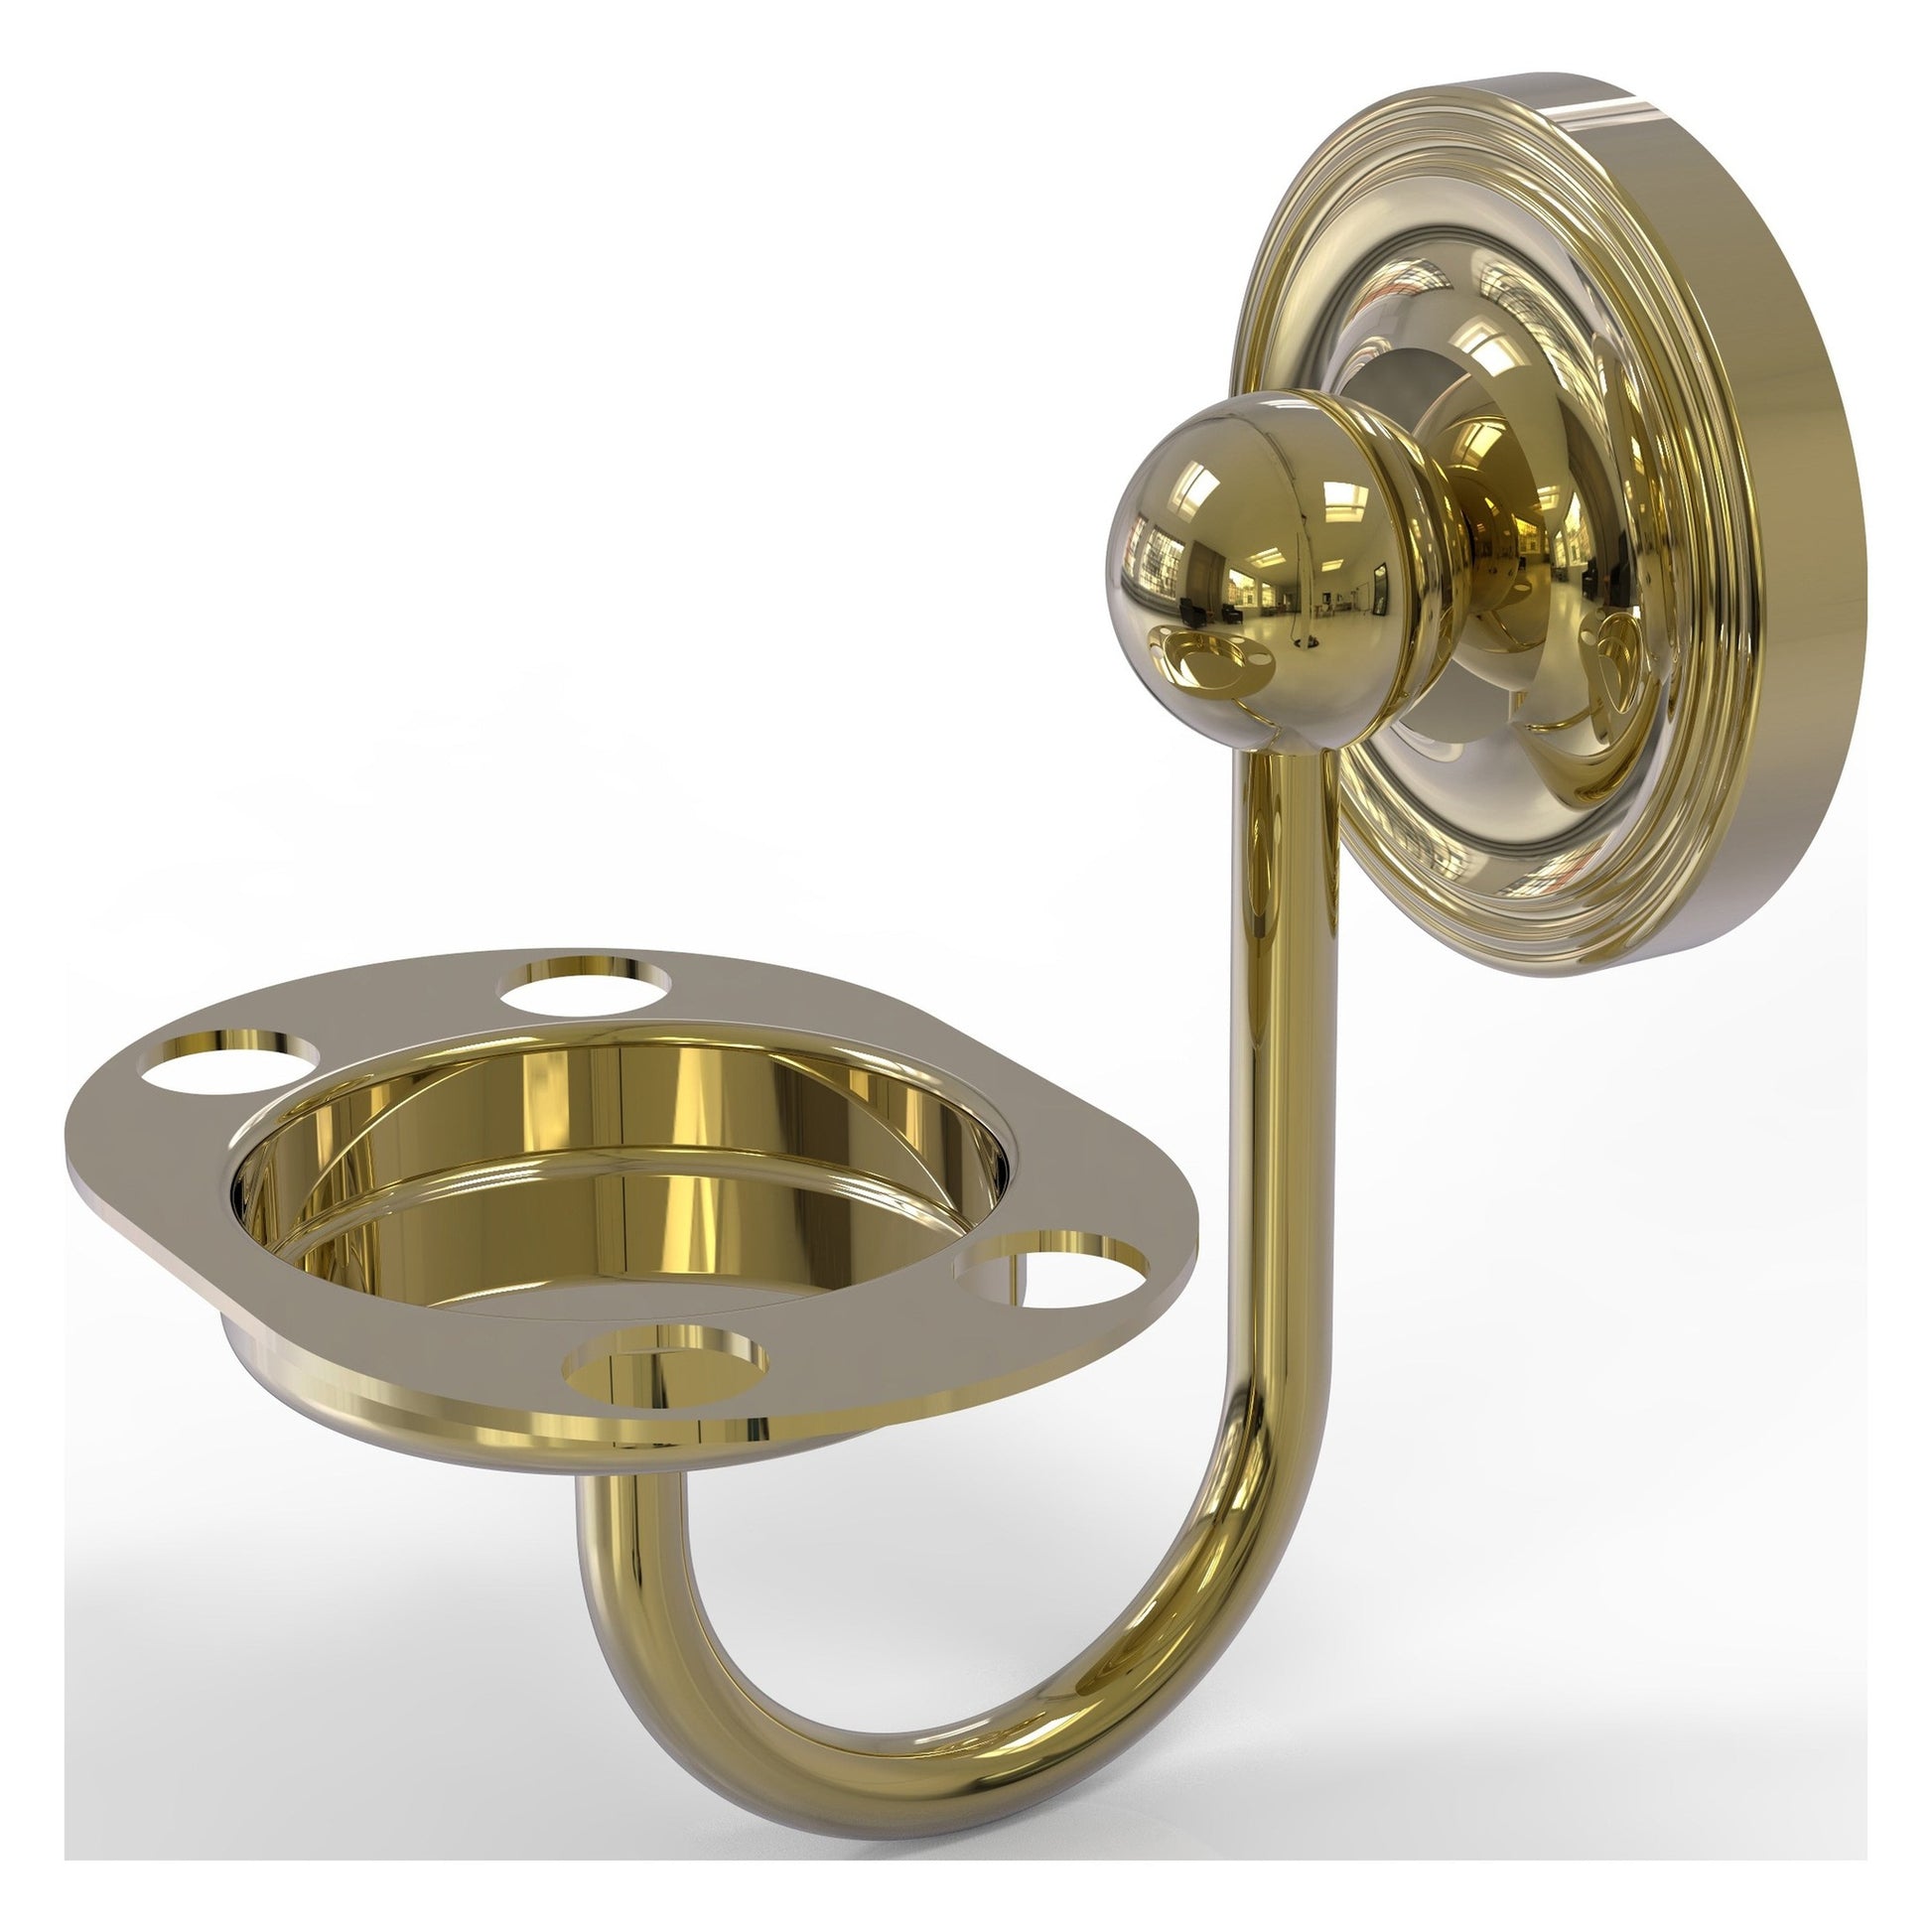 Allied Brass Prestige Regal 4.5" x 3.5" Unlacquered Brass Solid Brass Tumbler and Toothbrush Holder